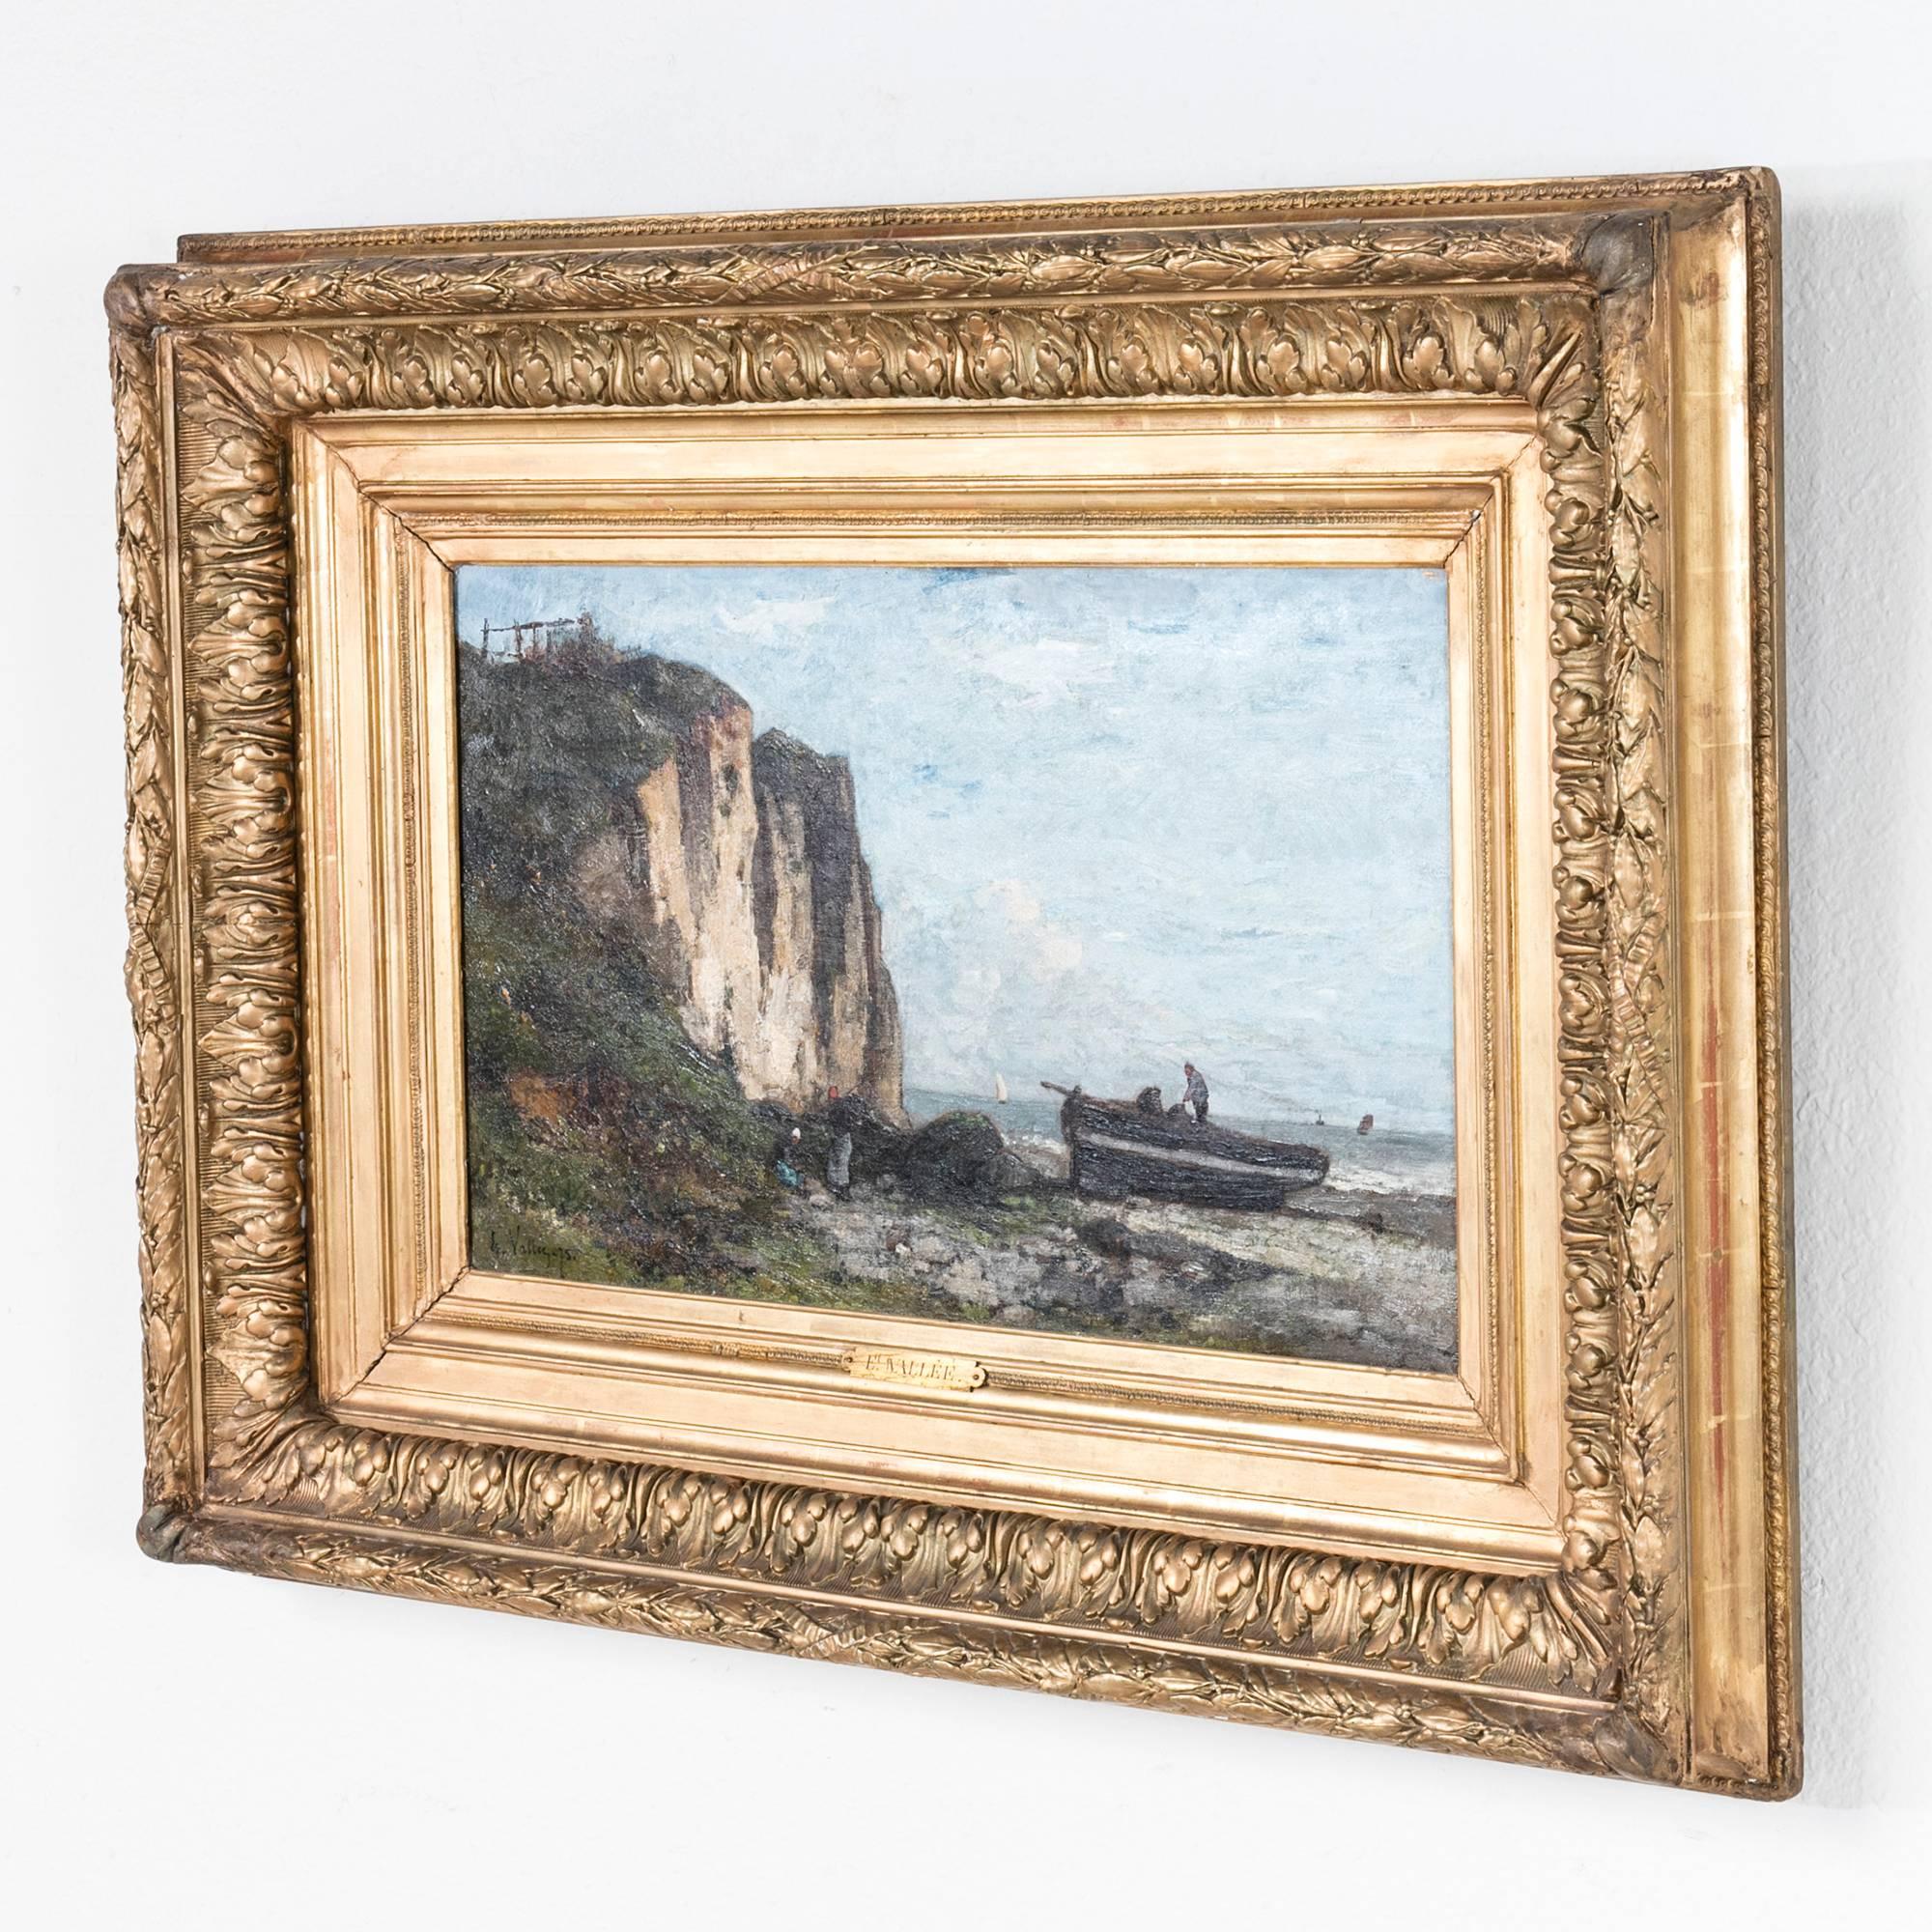 Late 19th Century 19th Century Oil on Canvas Cliffside Seascape by Etienne Vallee in Museum Frame